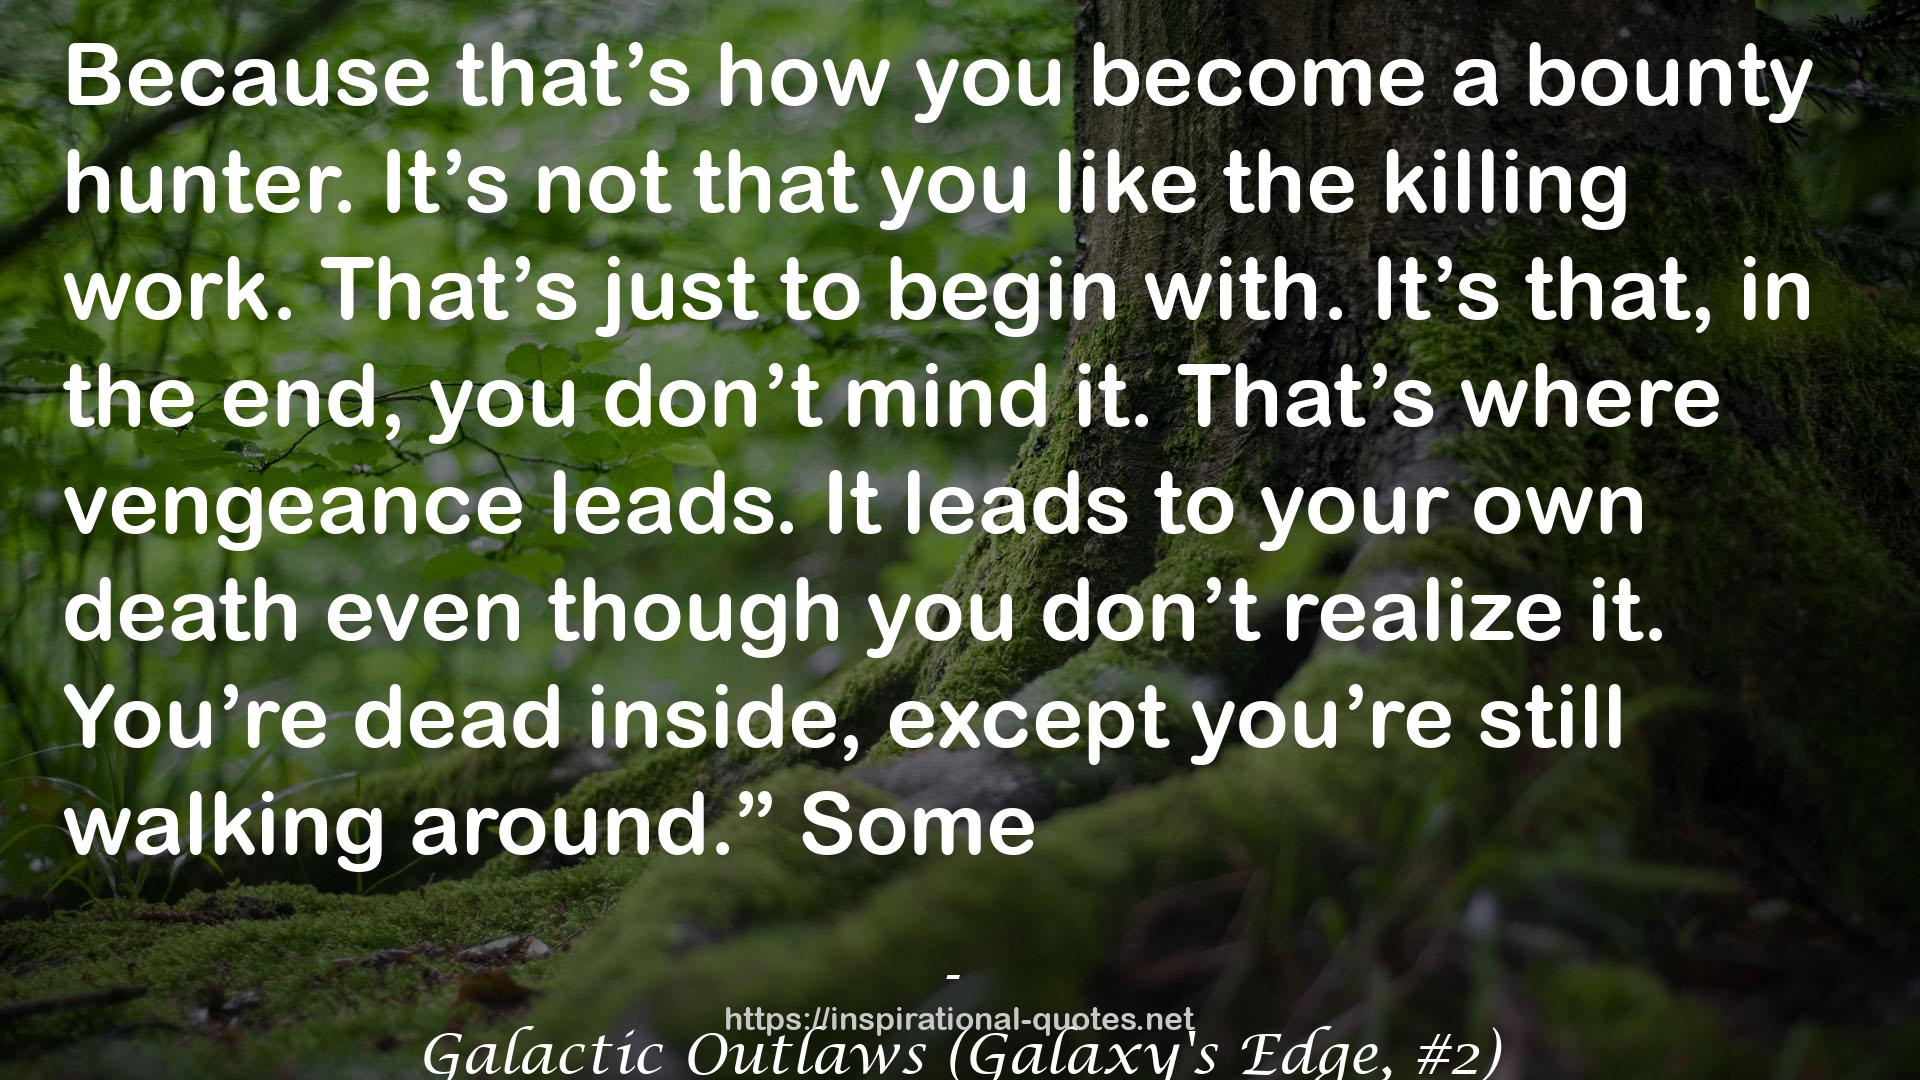 Galactic Outlaws (Galaxy's Edge, #2) QUOTES